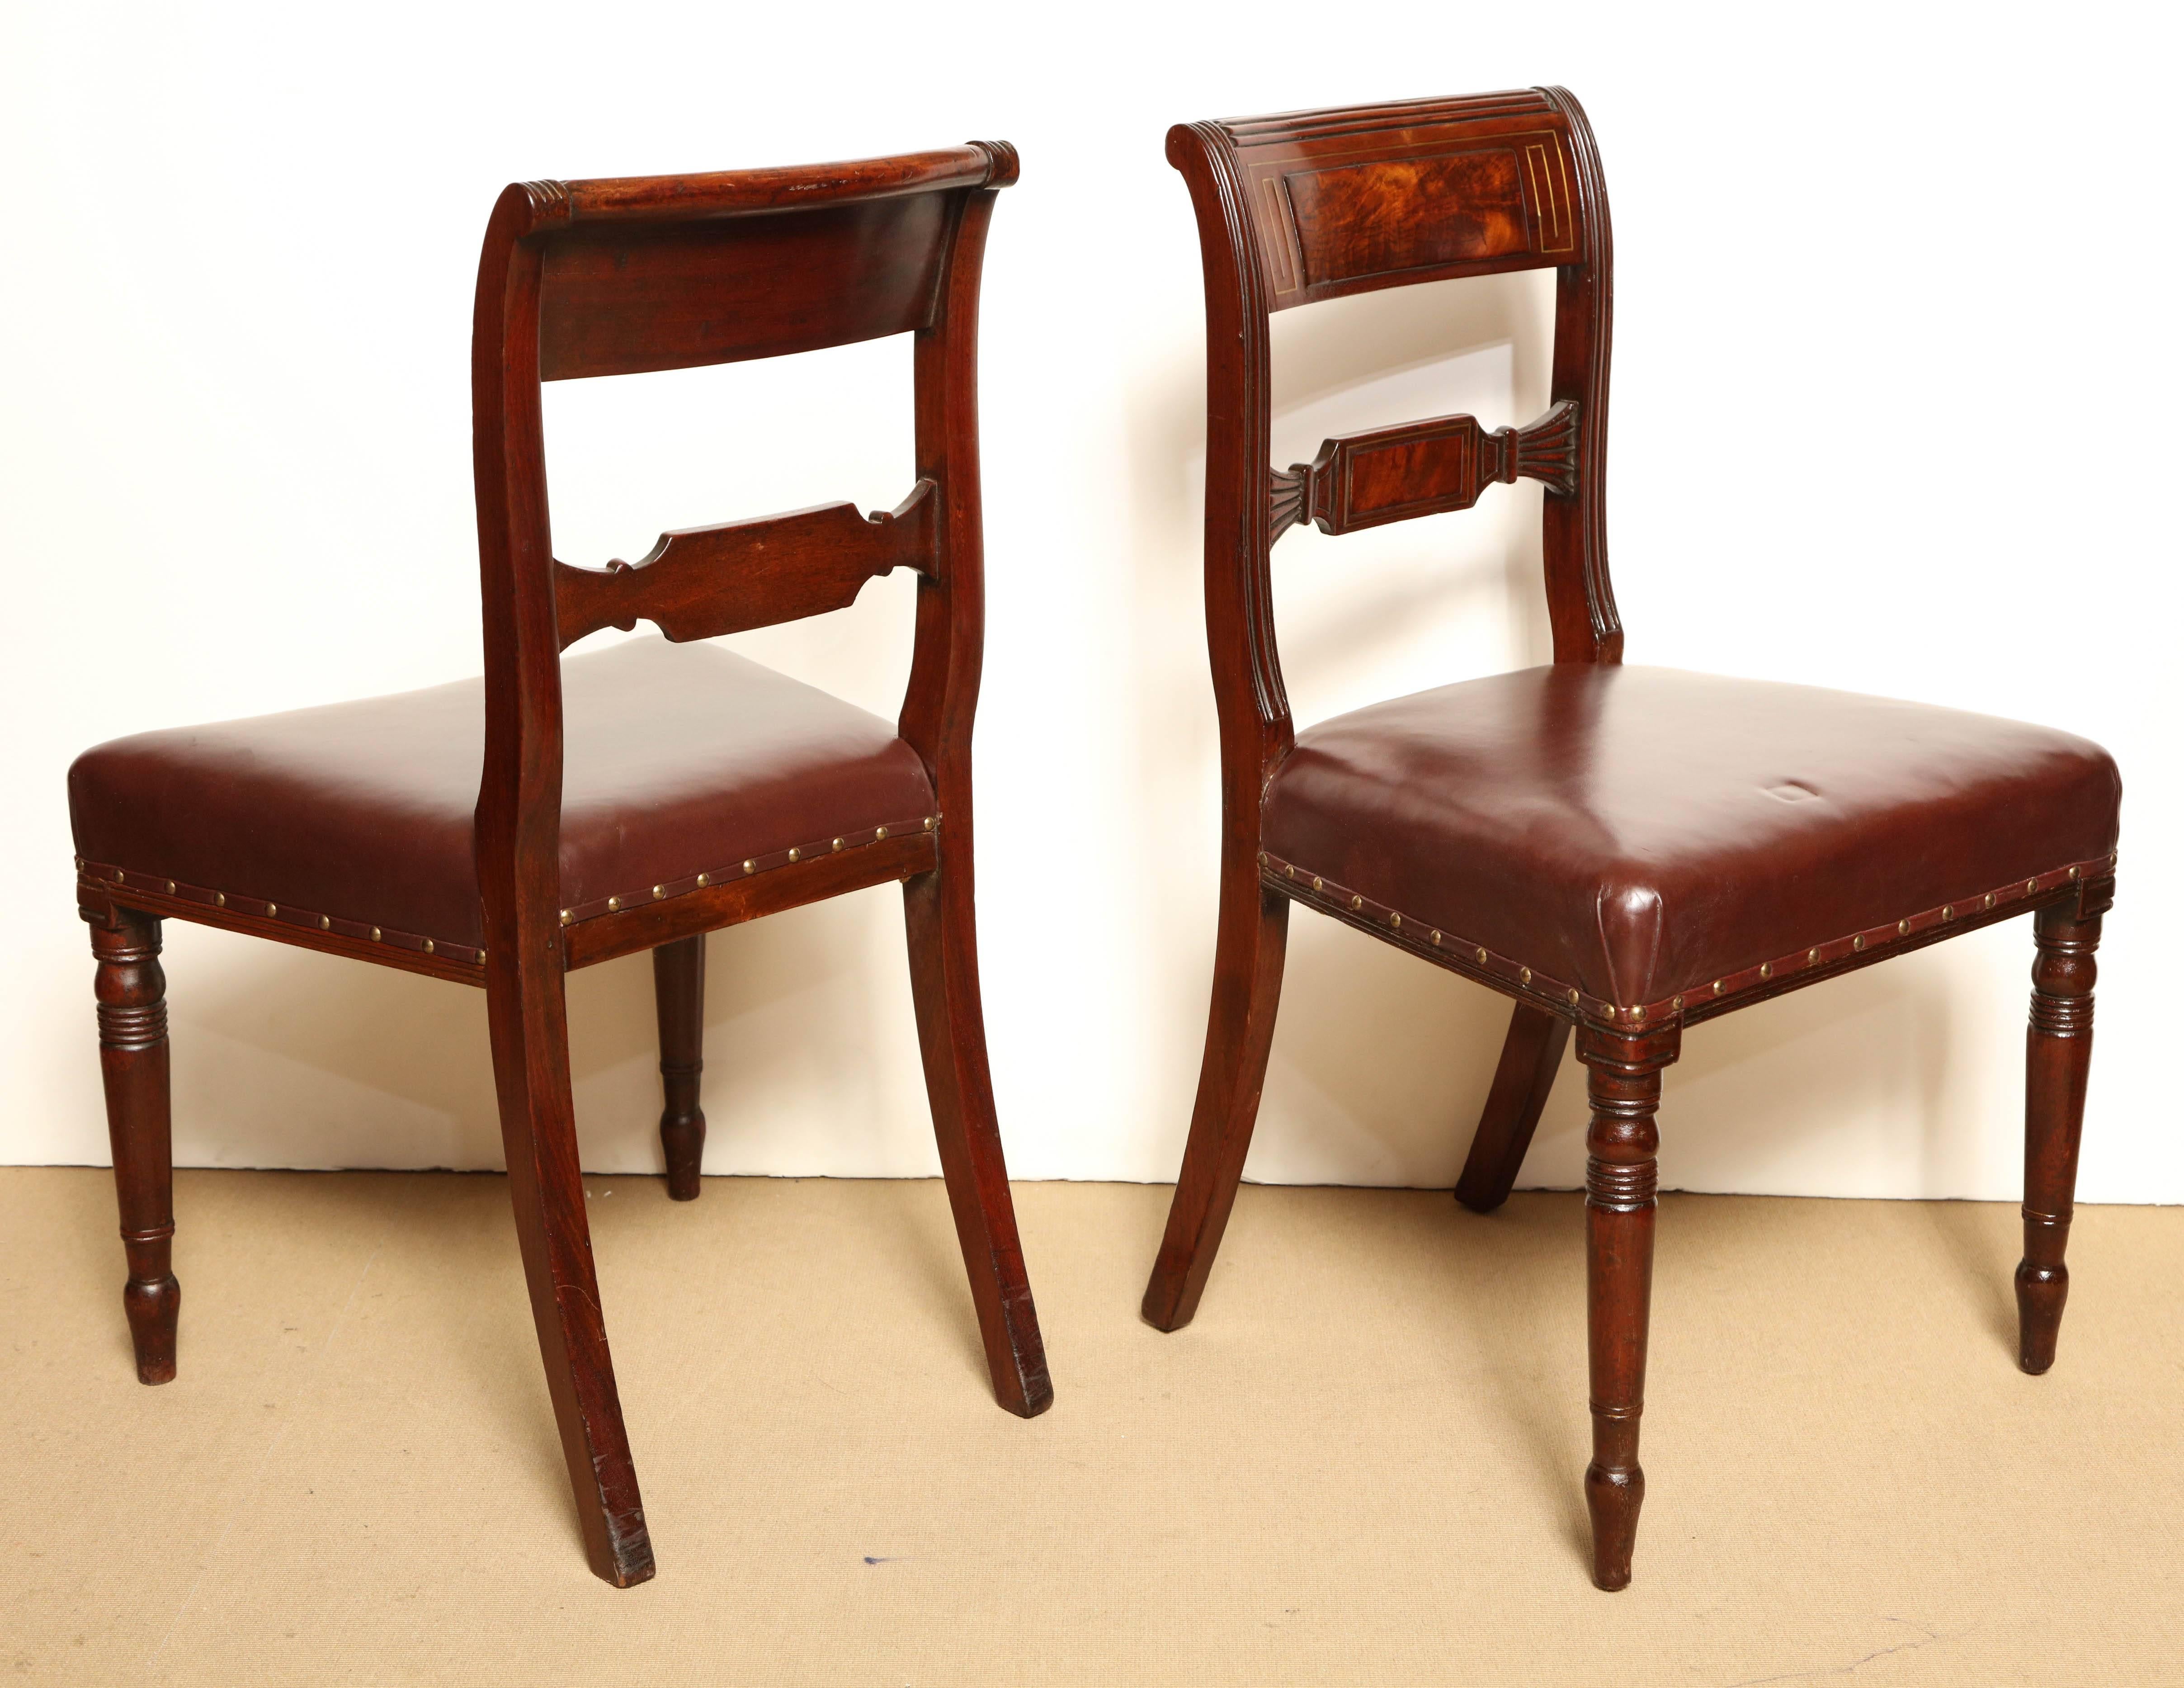 Pair of early 19th century English Regency, mahogany and brass inlay side chairs.